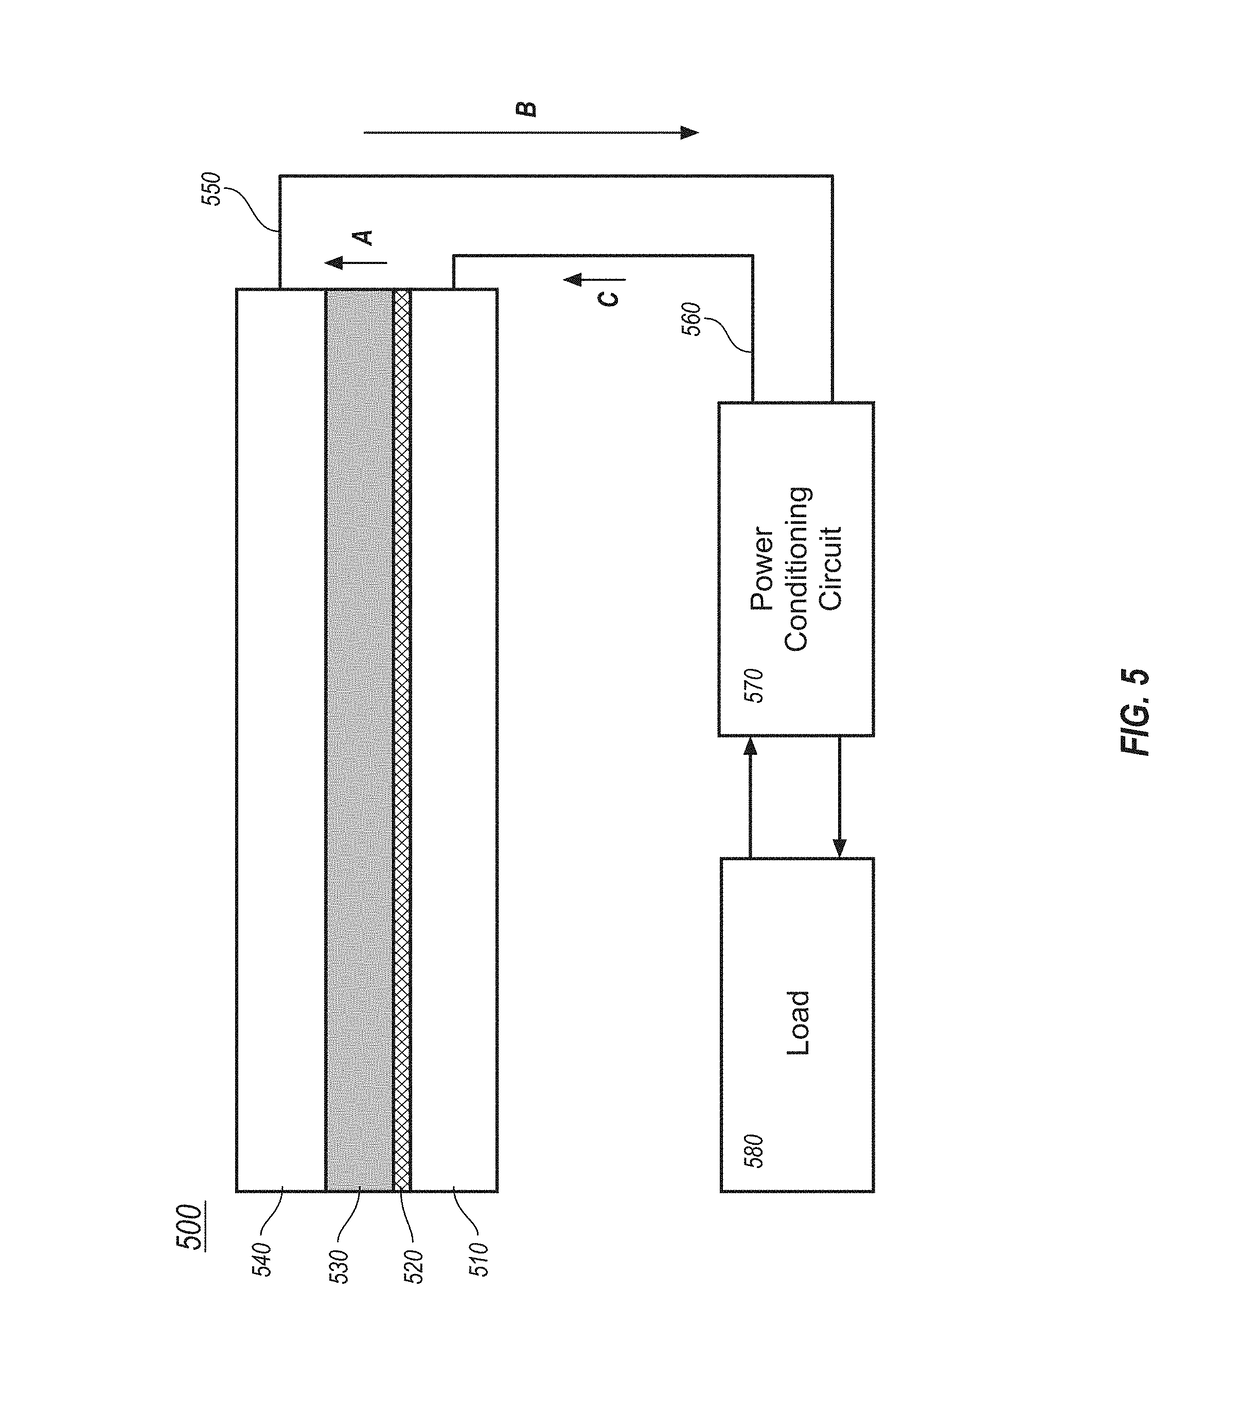 Devices and systems incorporating energy harvesting components/devices as autonomous energy sources and as energy supplementation, and methods for producing devices and systems incorporating energy harvesting components/devices